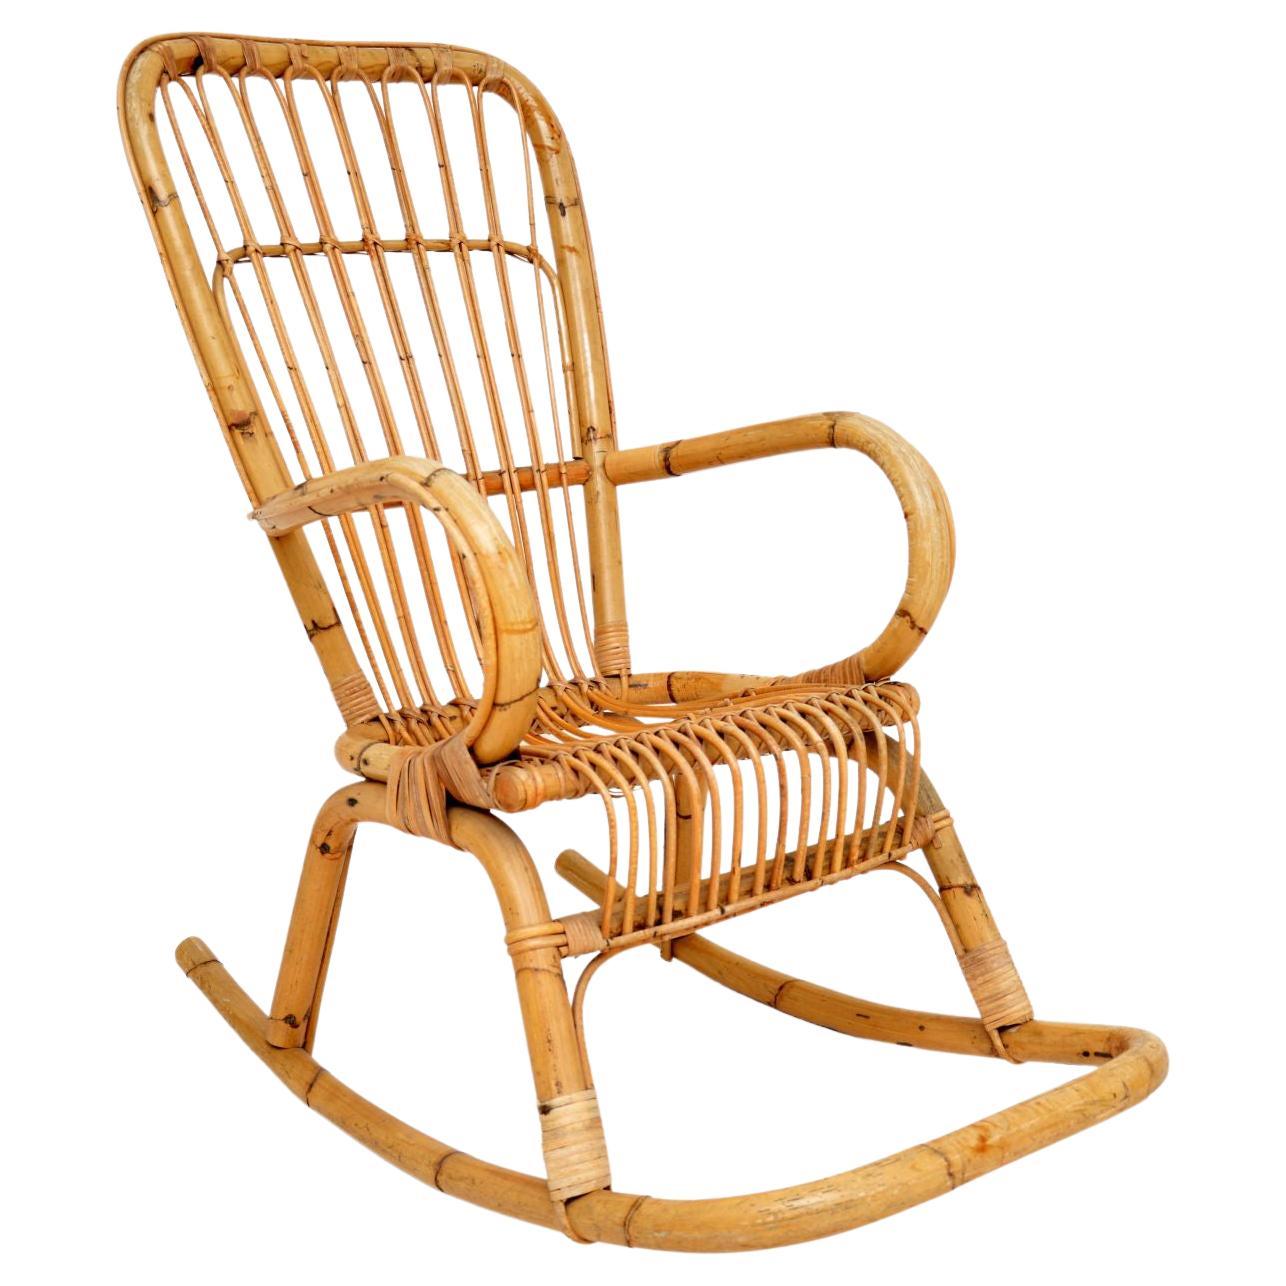 1970's Vintage Bamboo Rocking Chair